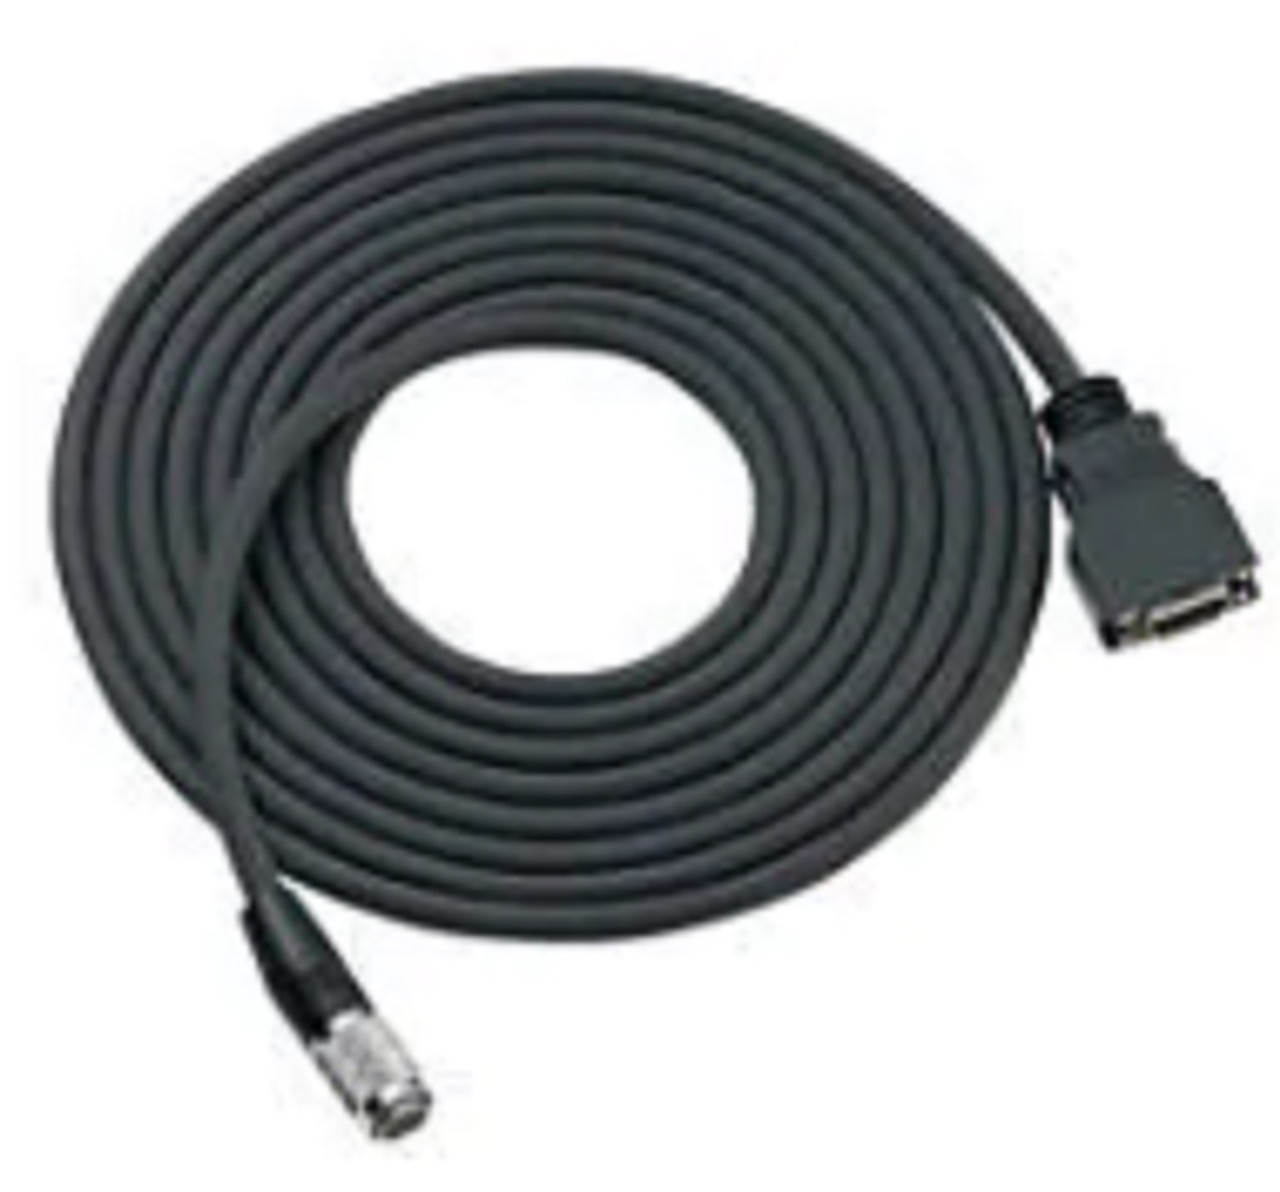 Keyence CA-CN17 Camera Cable 17 m, For Intuitive Vision System [New]